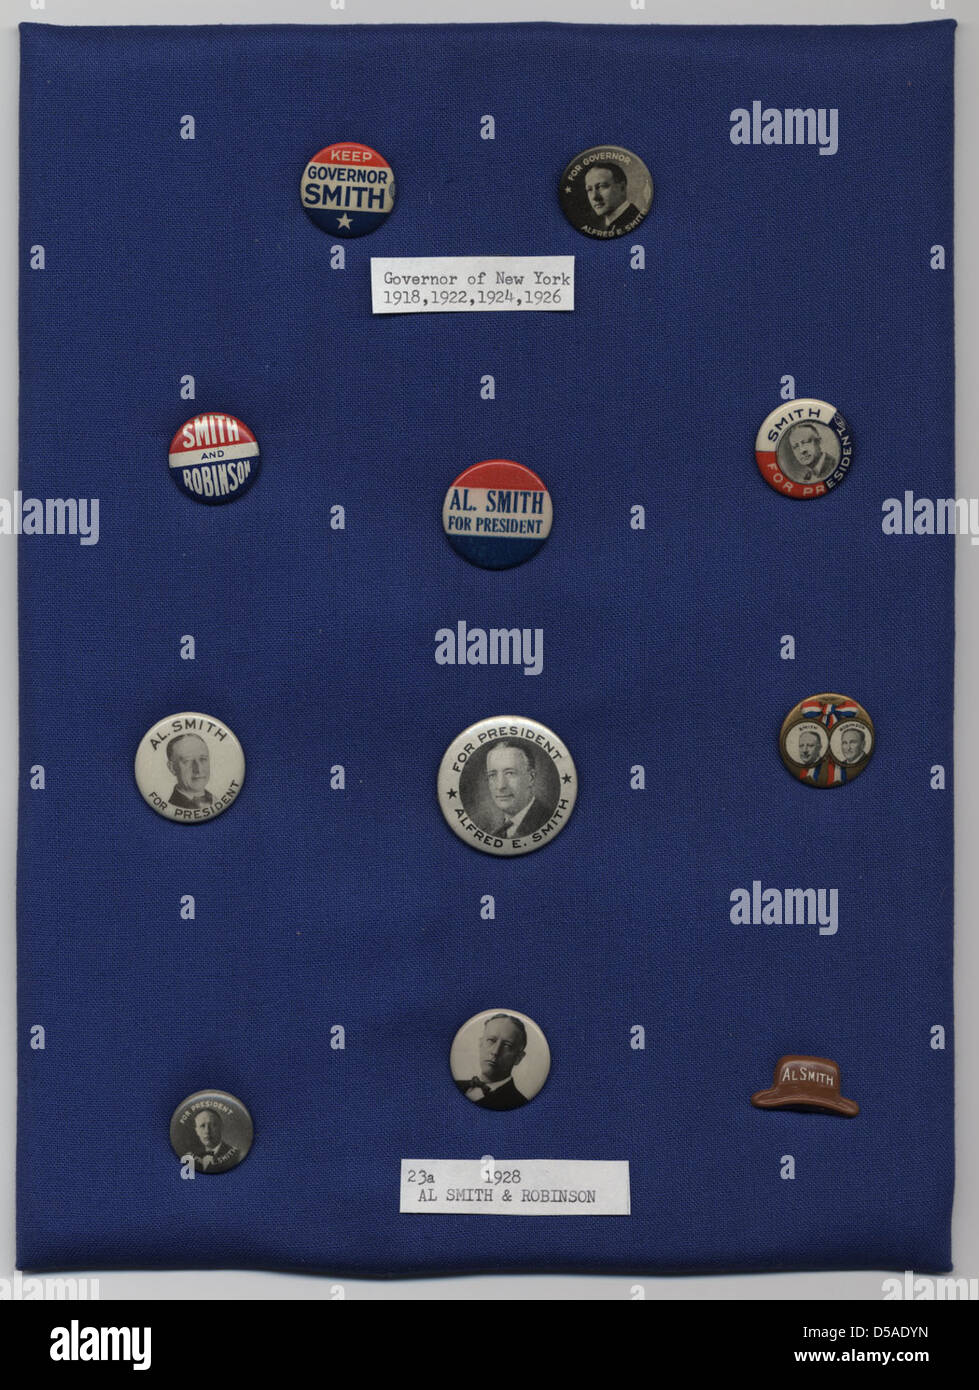 Smith-Robinson Campaign Buttons and Lapel Pin, ca. 1918-1928 Stock Photo